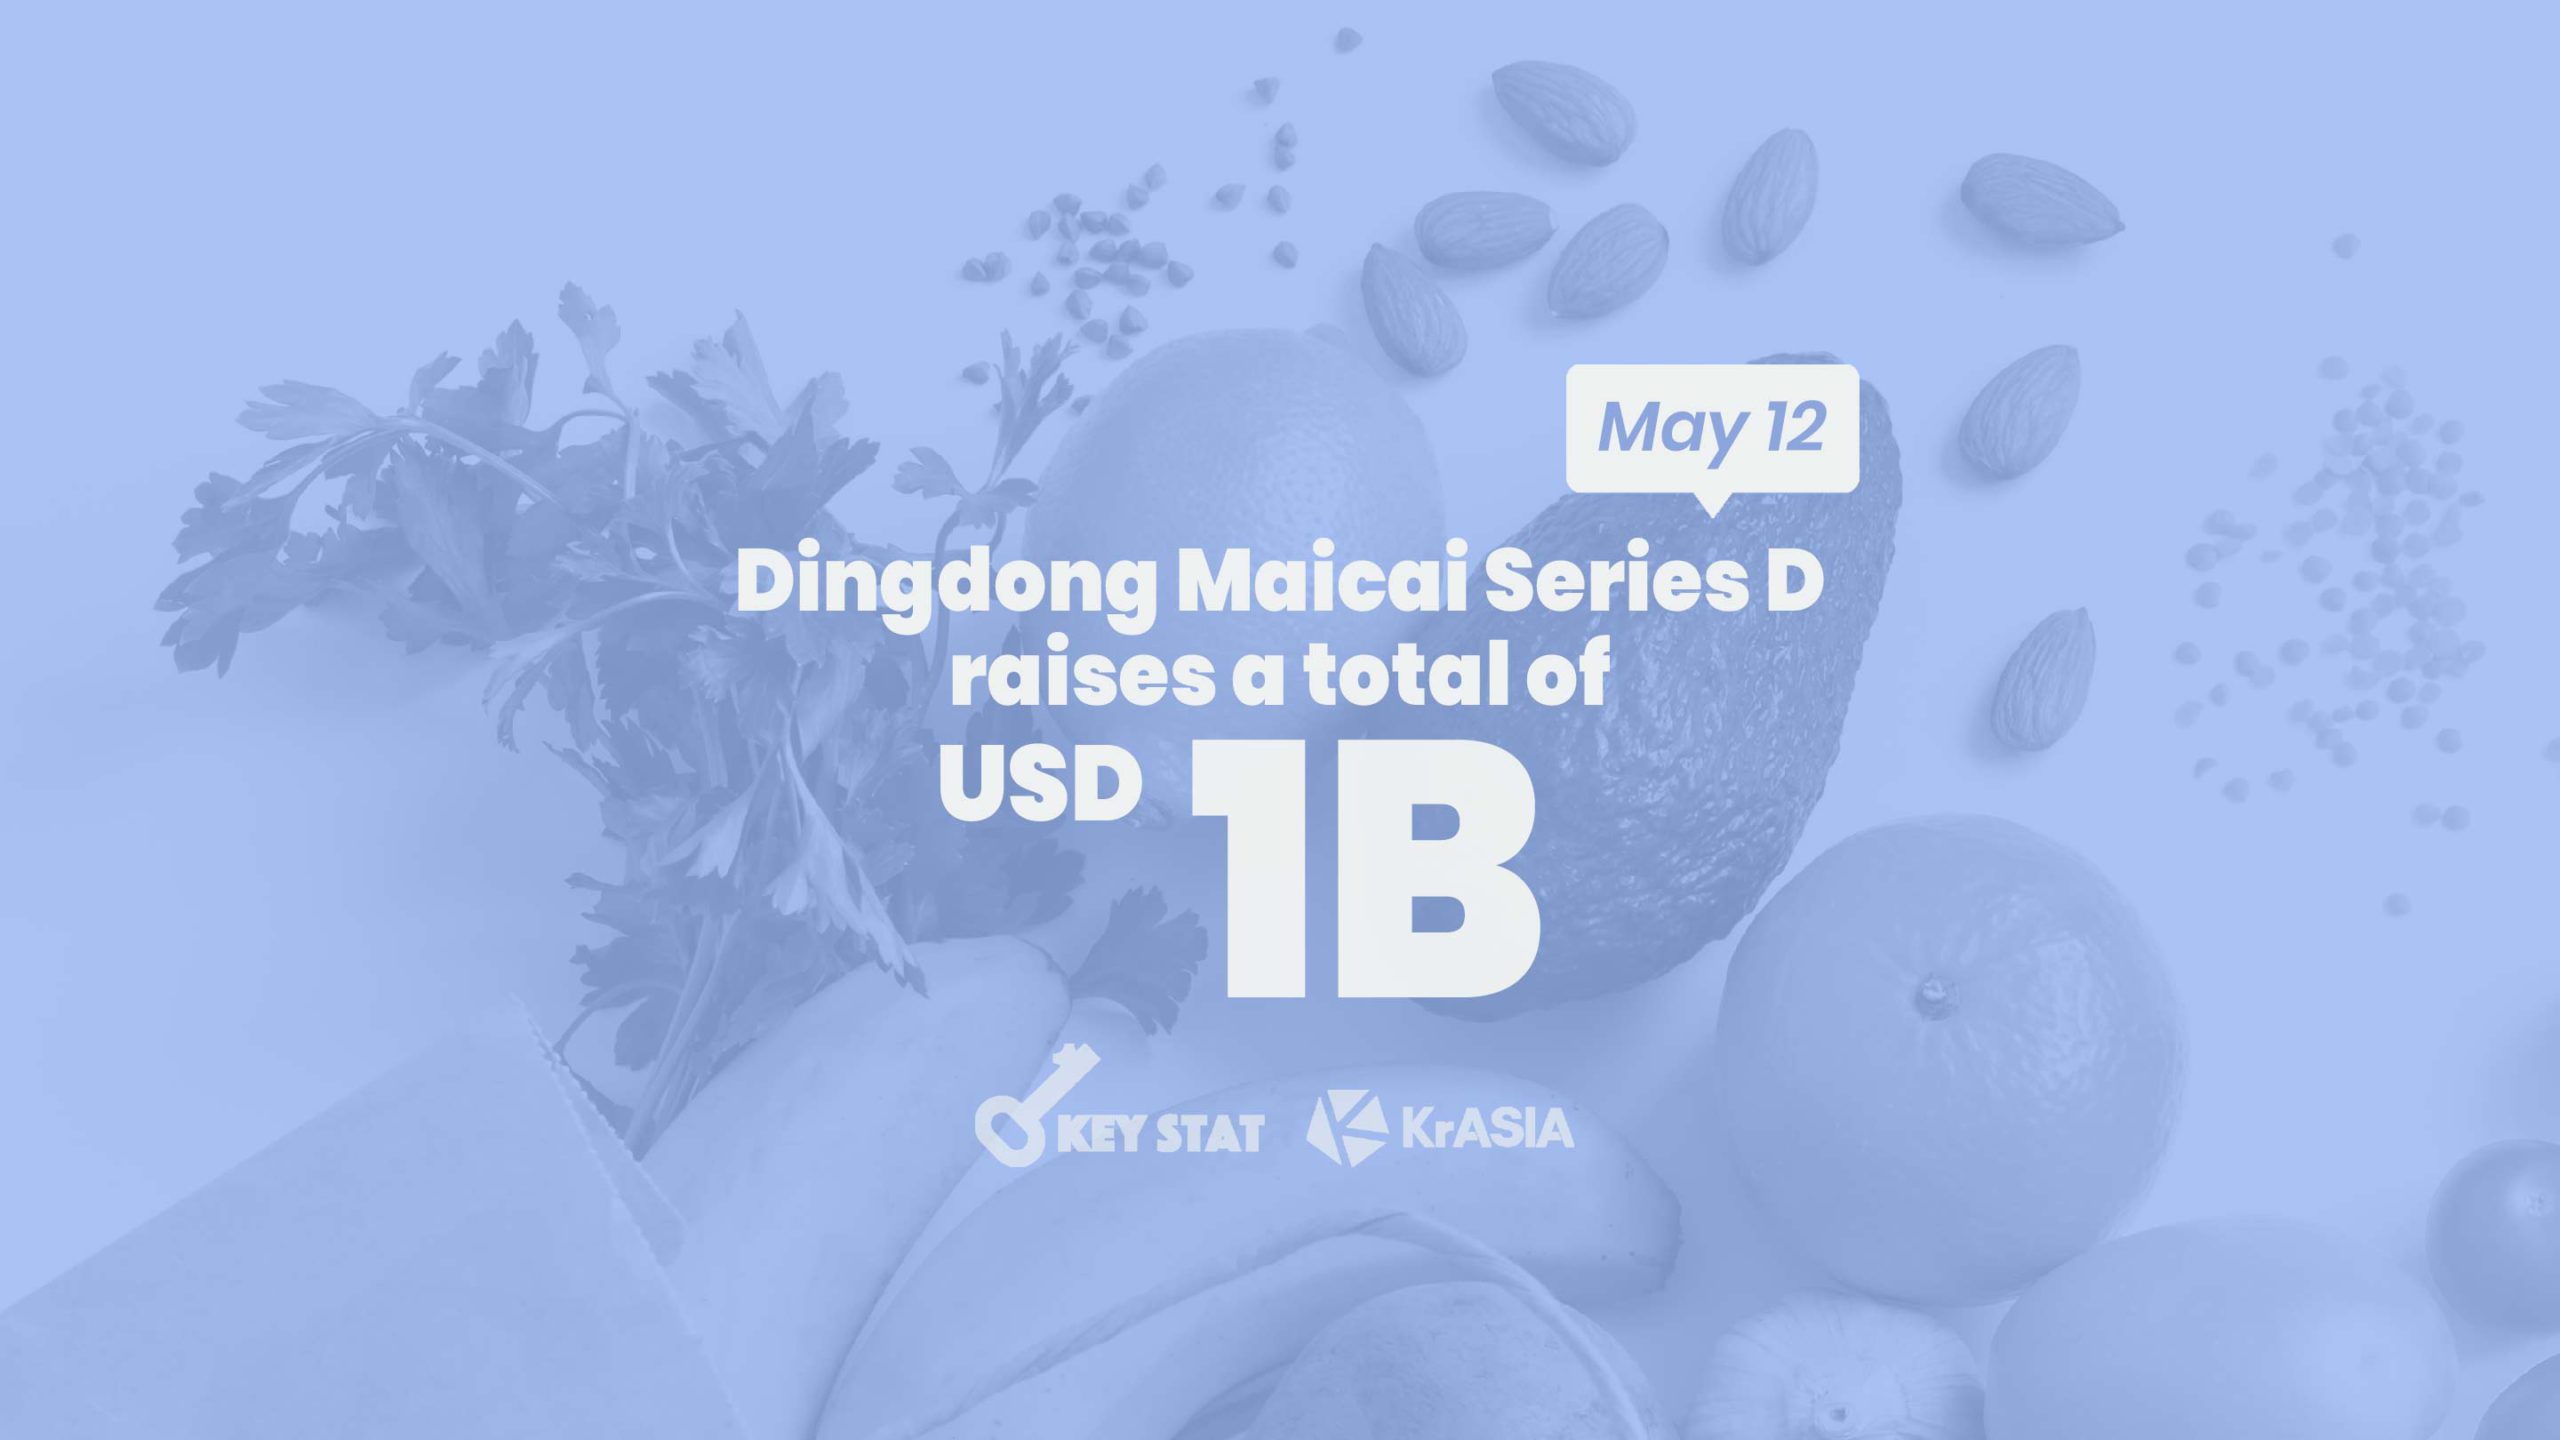 KEY STAT | Grocery app Dingdong Maicai completes mega funding round ahead of rumored IPO